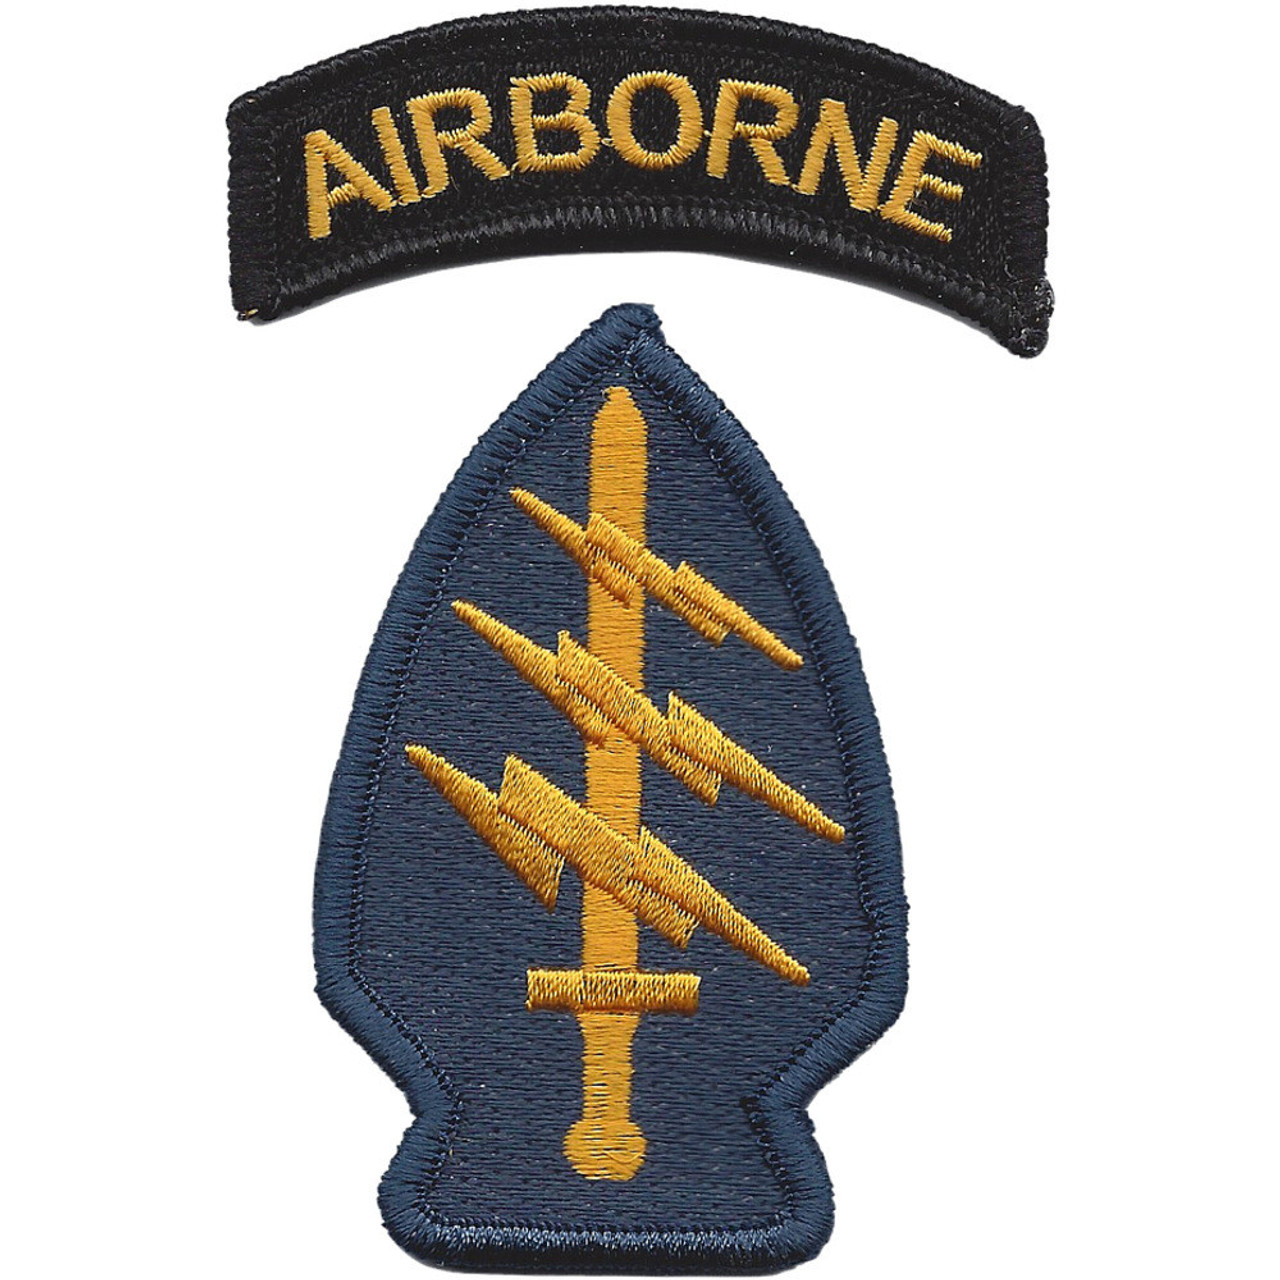 SOCOM, Airborne patches with velcro